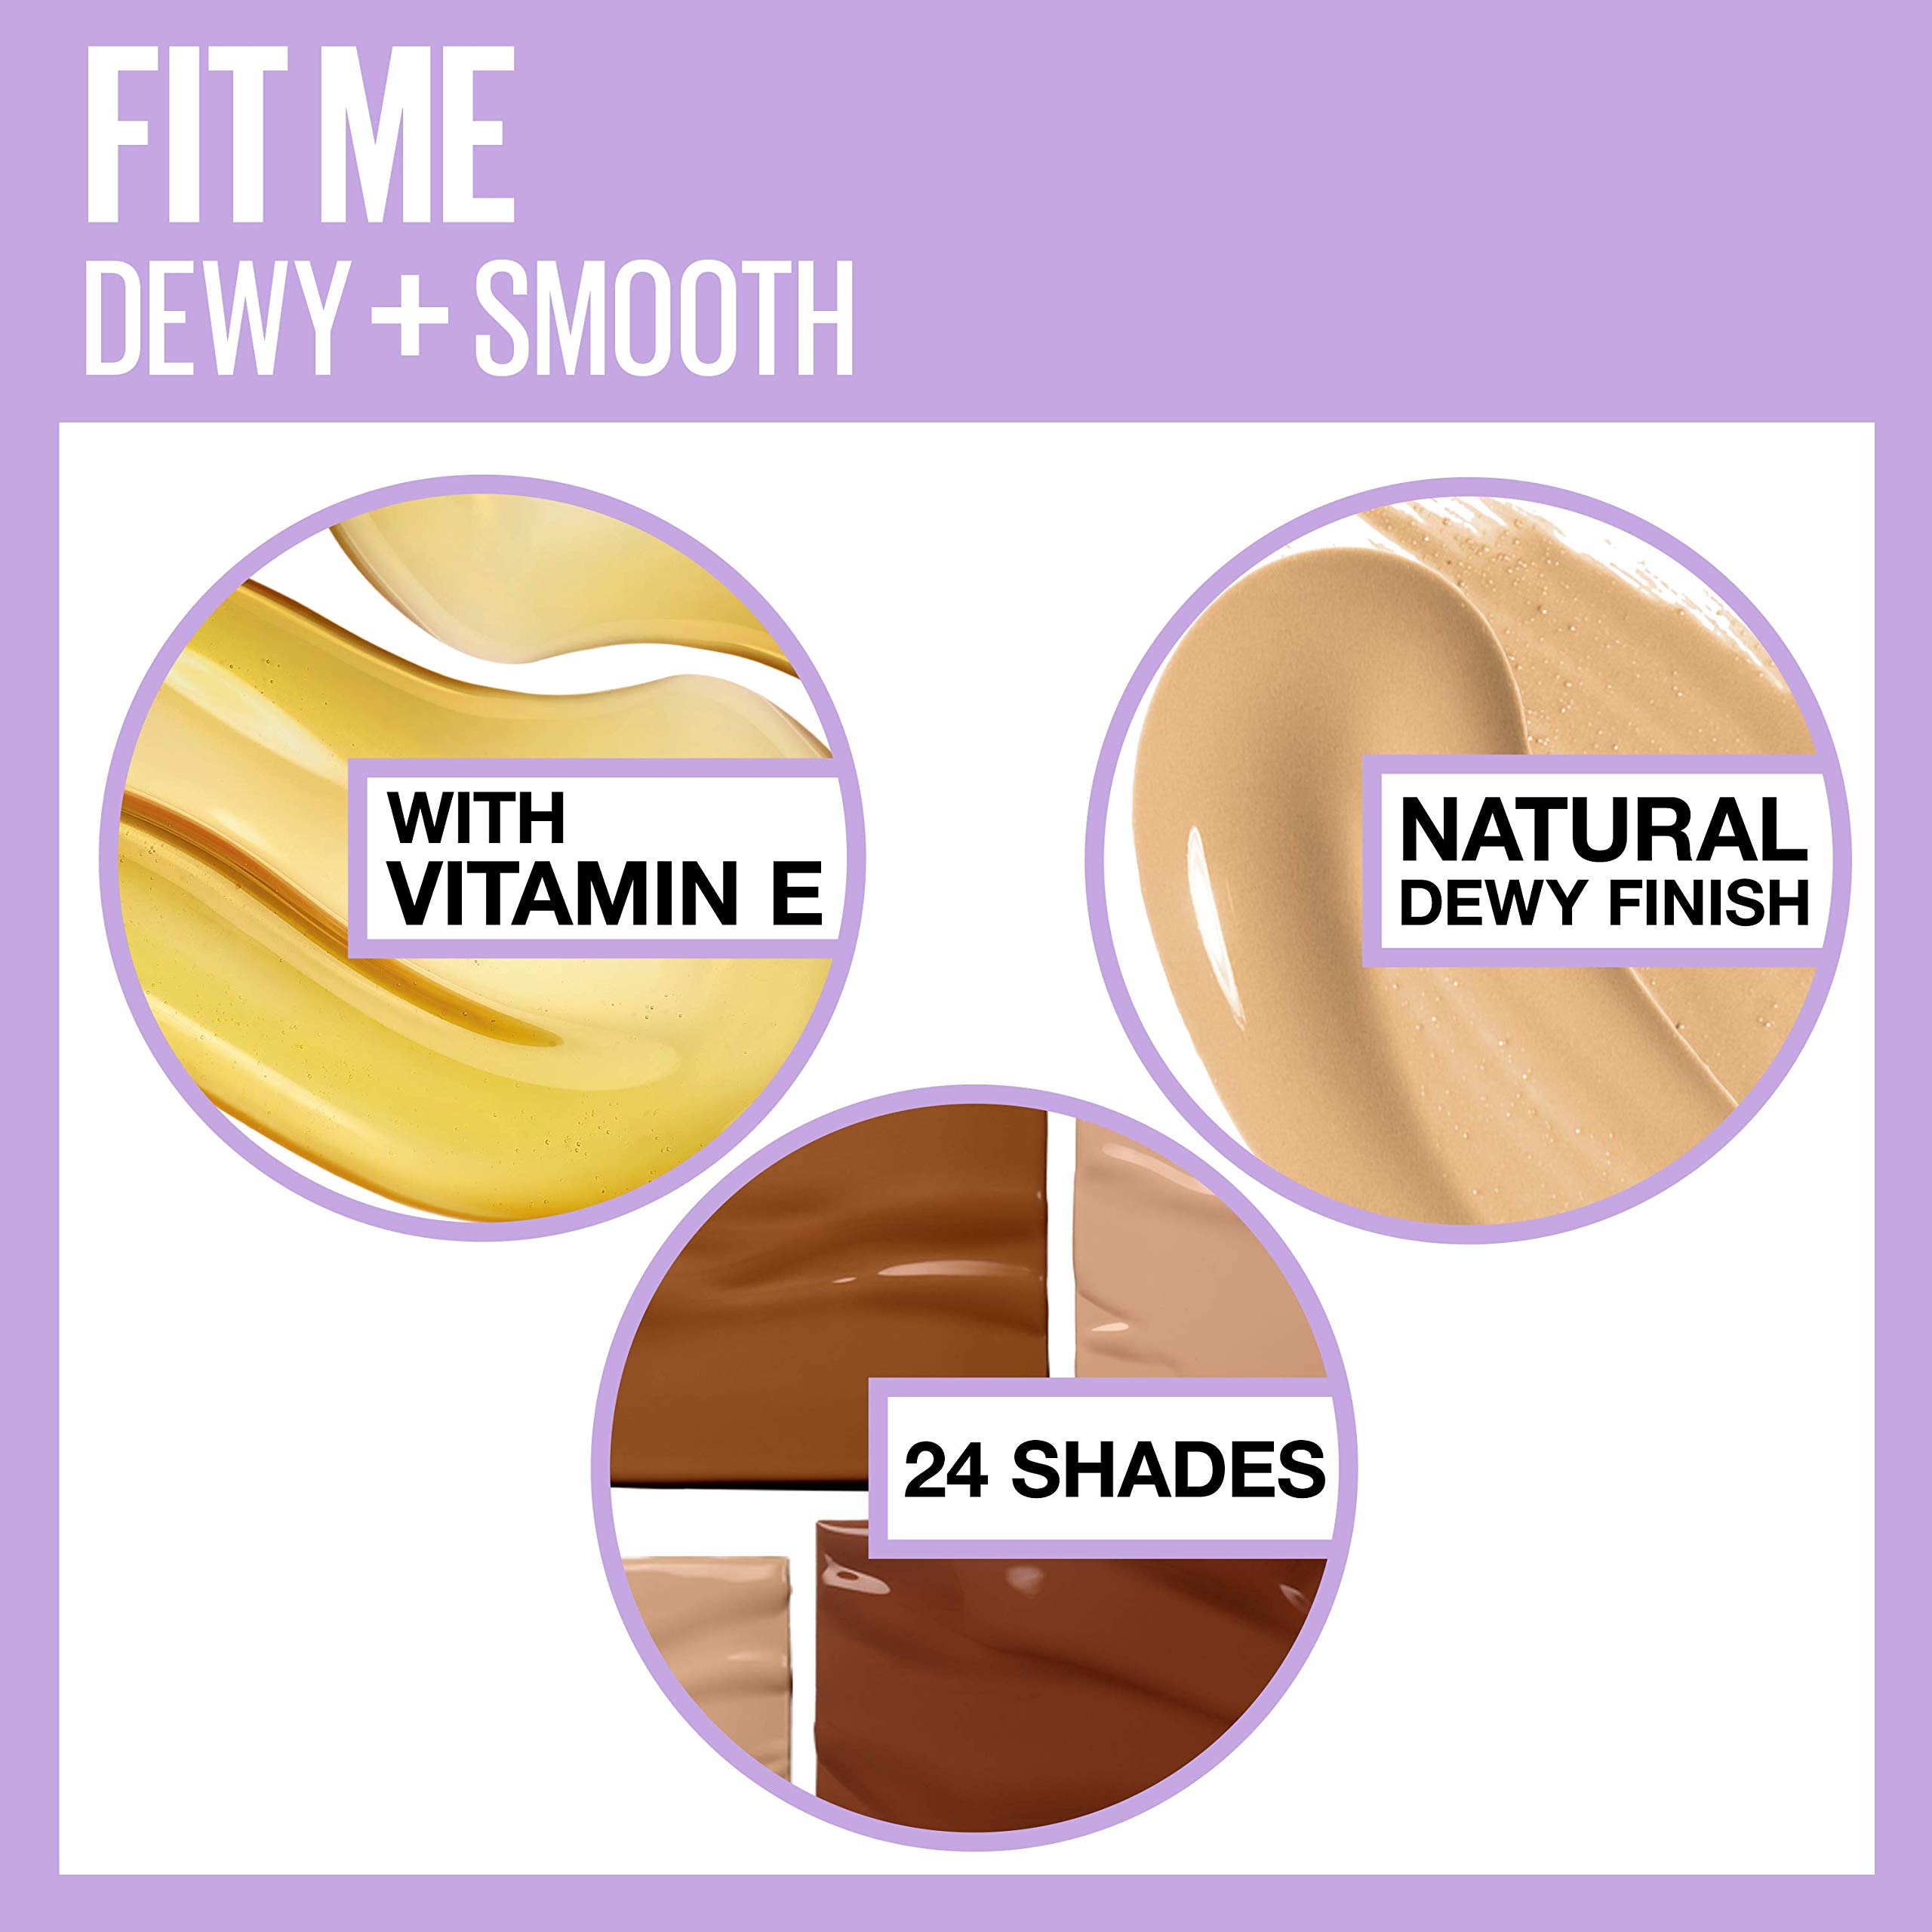 Maybelline Fit Me Dewy + Smooth SPF 18 Liquid Foundation Makeup, Classic Beige, 1 Count